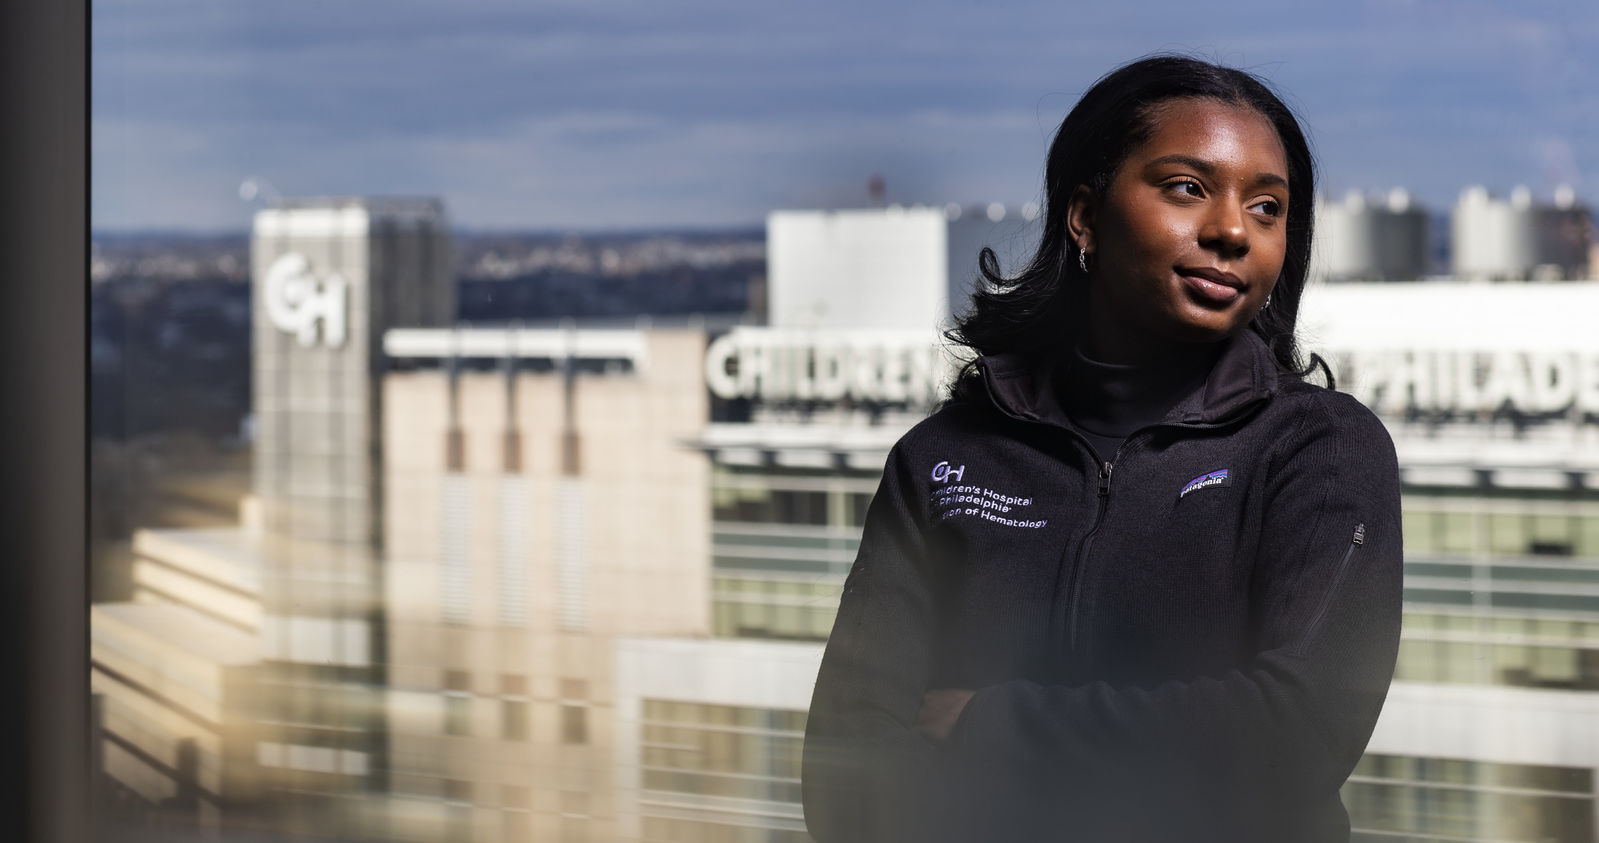 Alumna Deja Houser stands on a rooftop with Children's Hospital of Philadelphia visible behind her